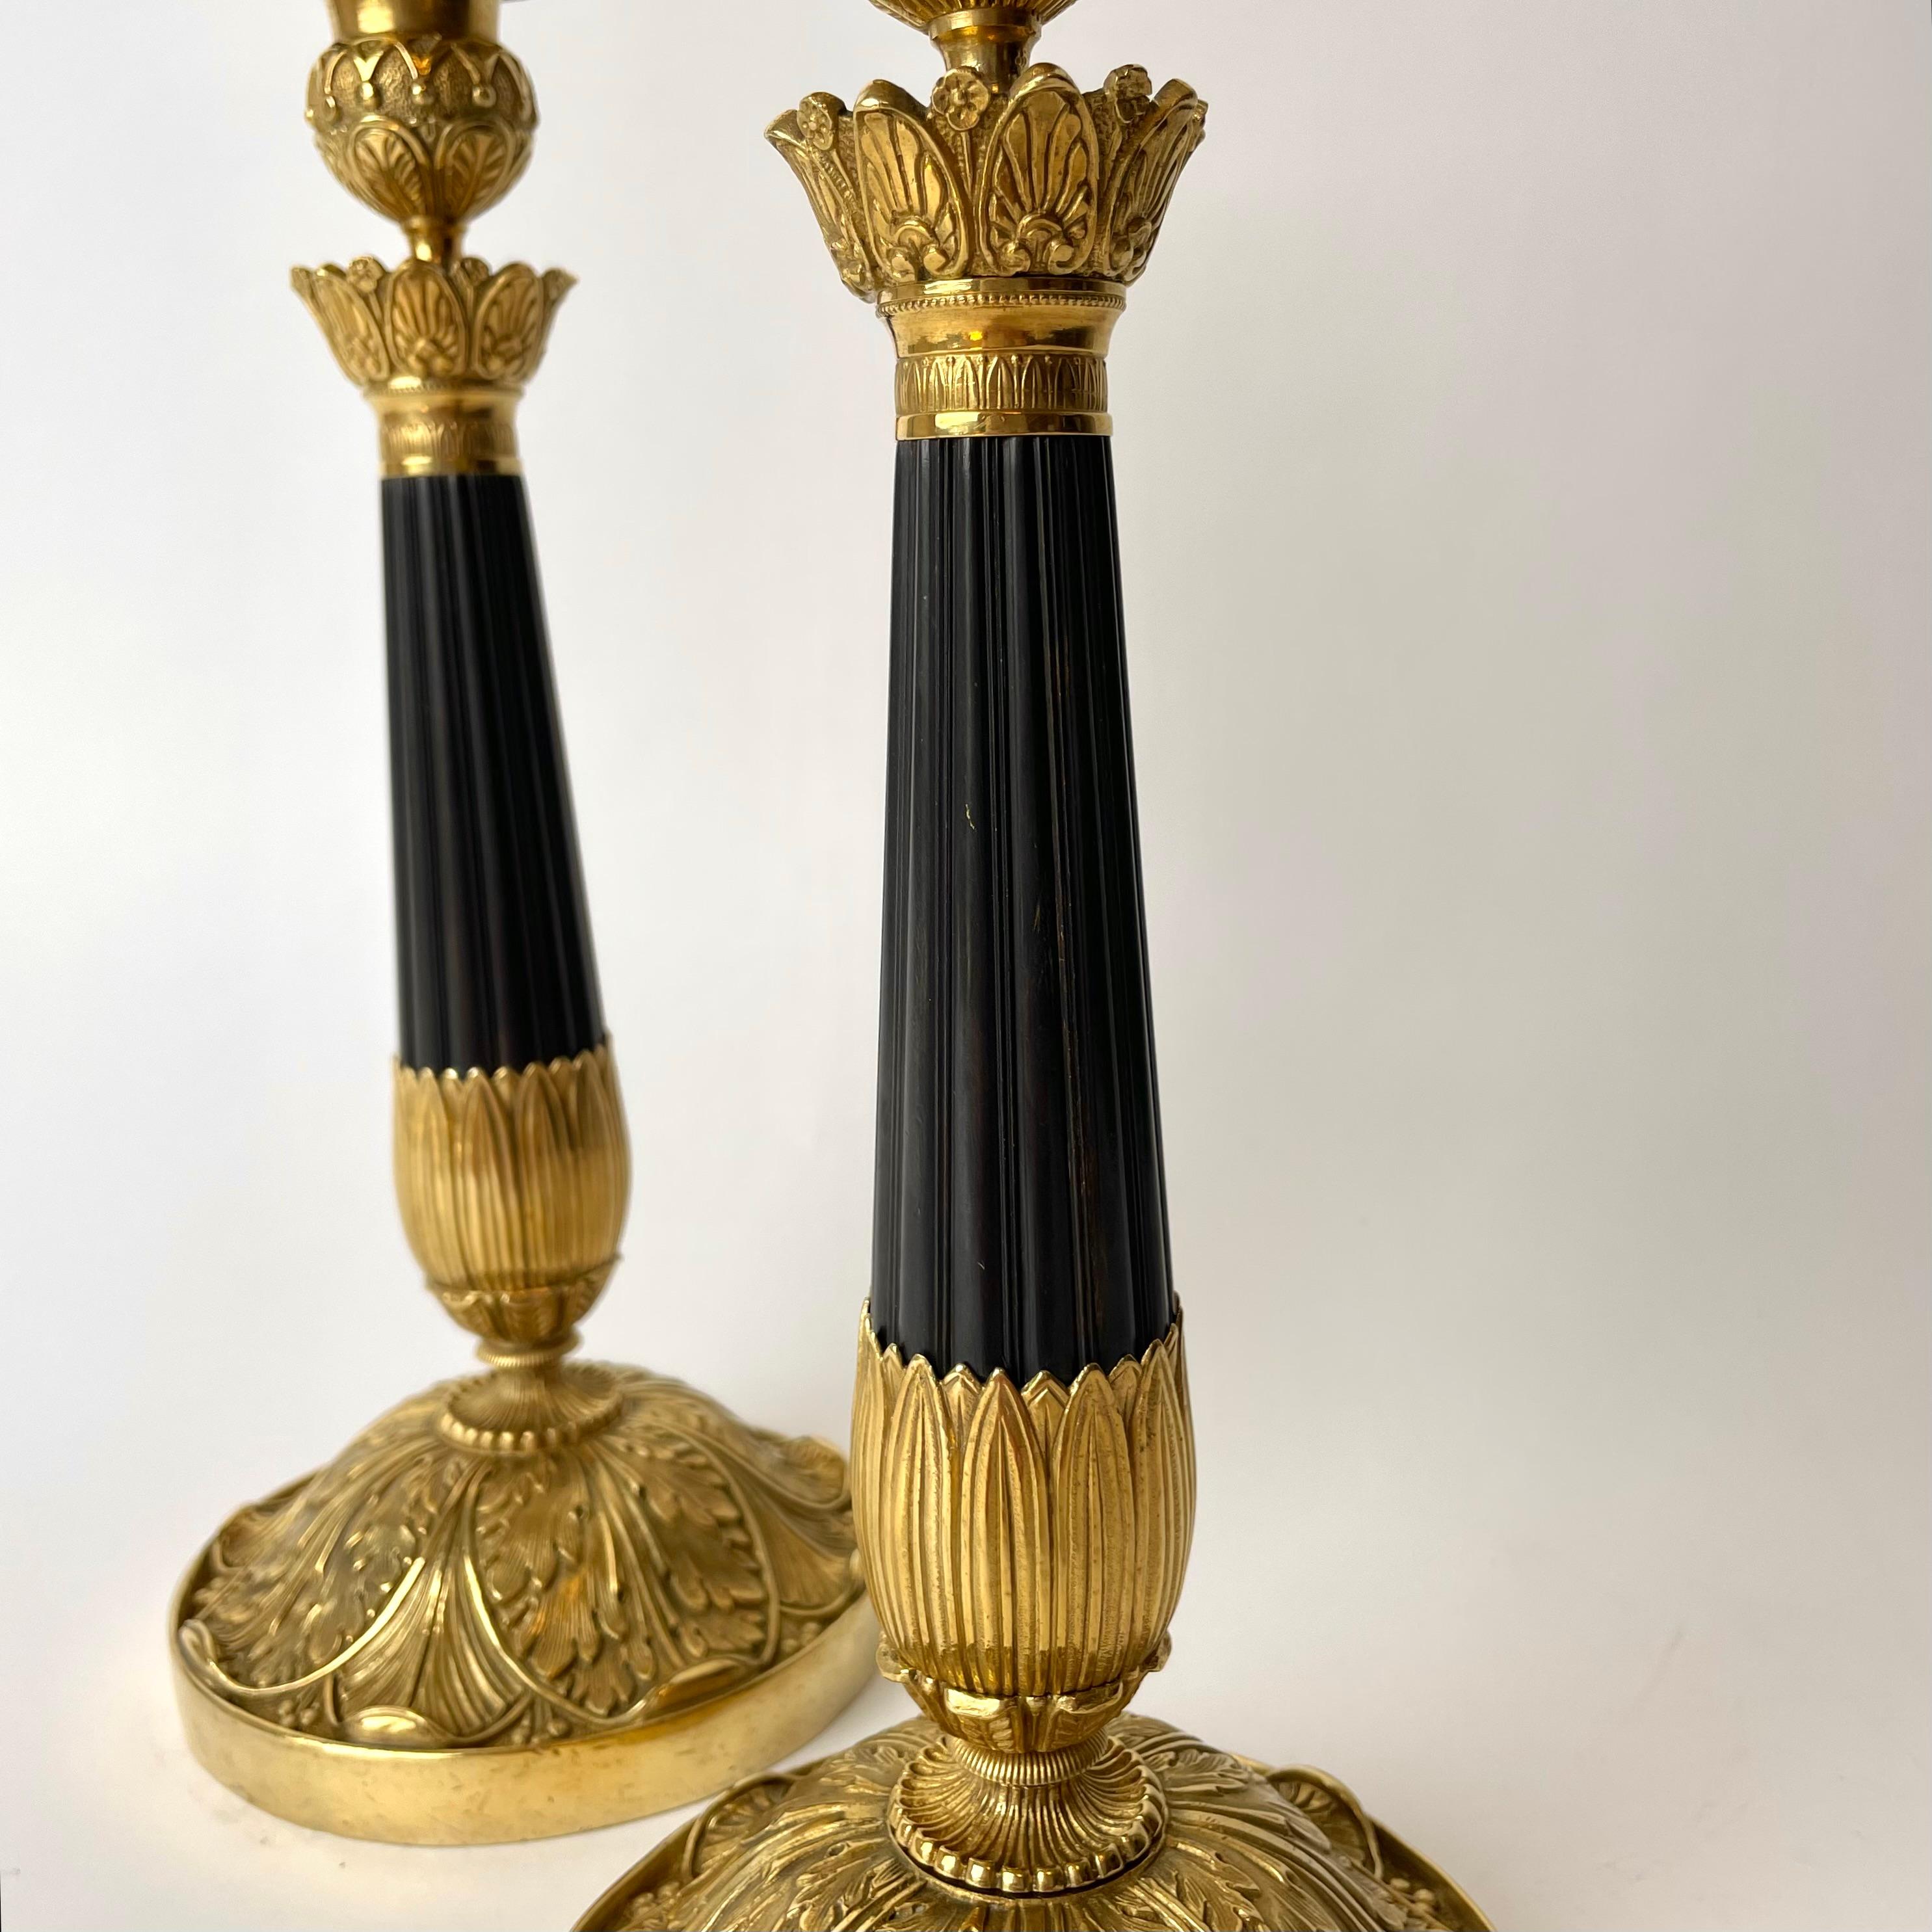 Pair of Empire Candlesticks, Gilded and Patinated Bronze, Early 19th Century In Good Condition For Sale In Knivsta, SE